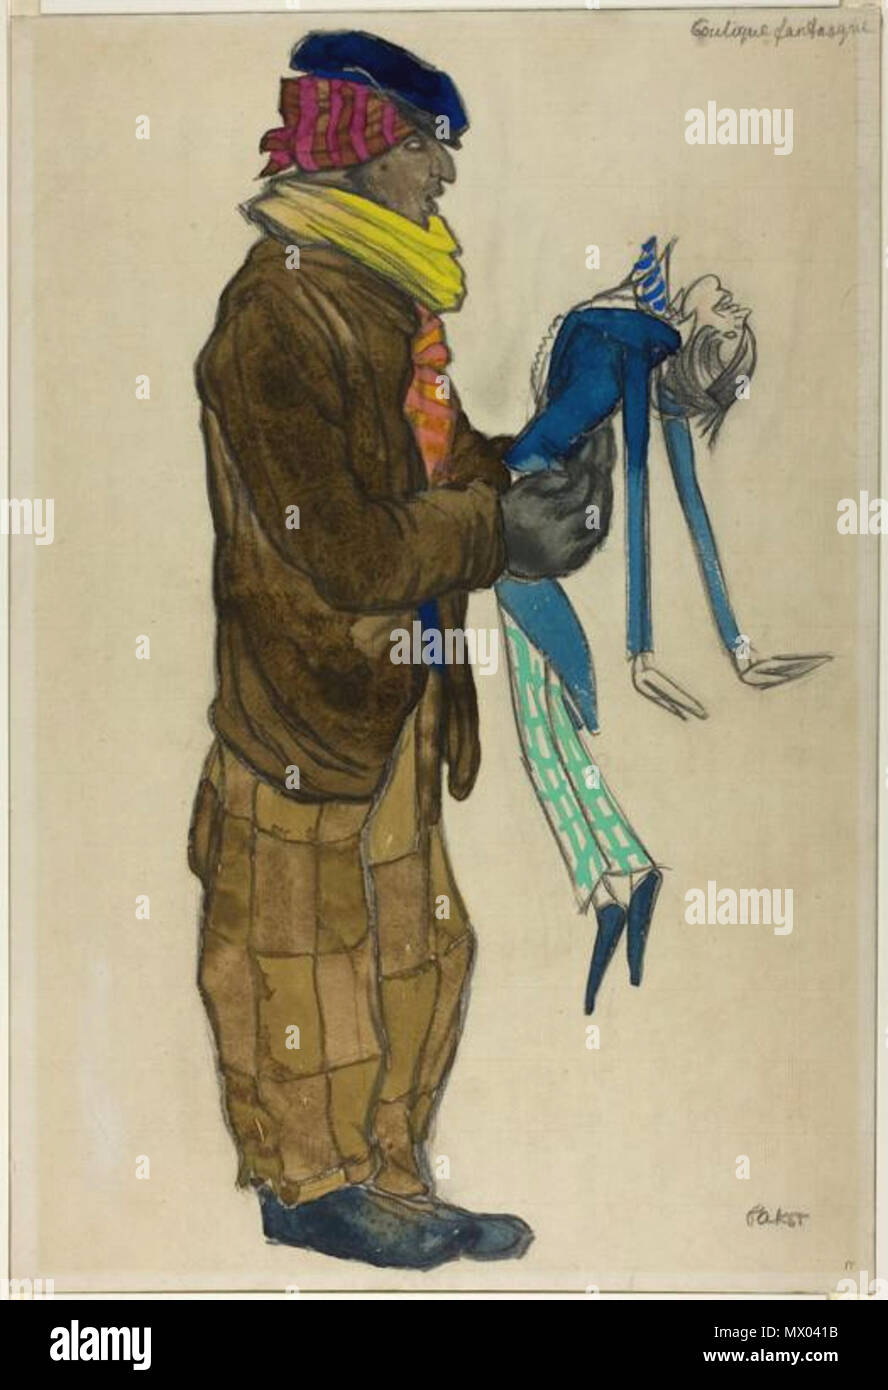 . Léon Bakst Russian, 1868-1924 Costume Design for Man in a Brown Suit, for Ballet Boutique Fastasque, 1918 Watercolor and graphite with gouache, on ivory laid paper laid down on gray board 488 x 331 mm Sidney A. Kent Fund, 1920.2525 . 1919. bakst 353 La boutique fantastique by L. Bakst 03 Stock Photo